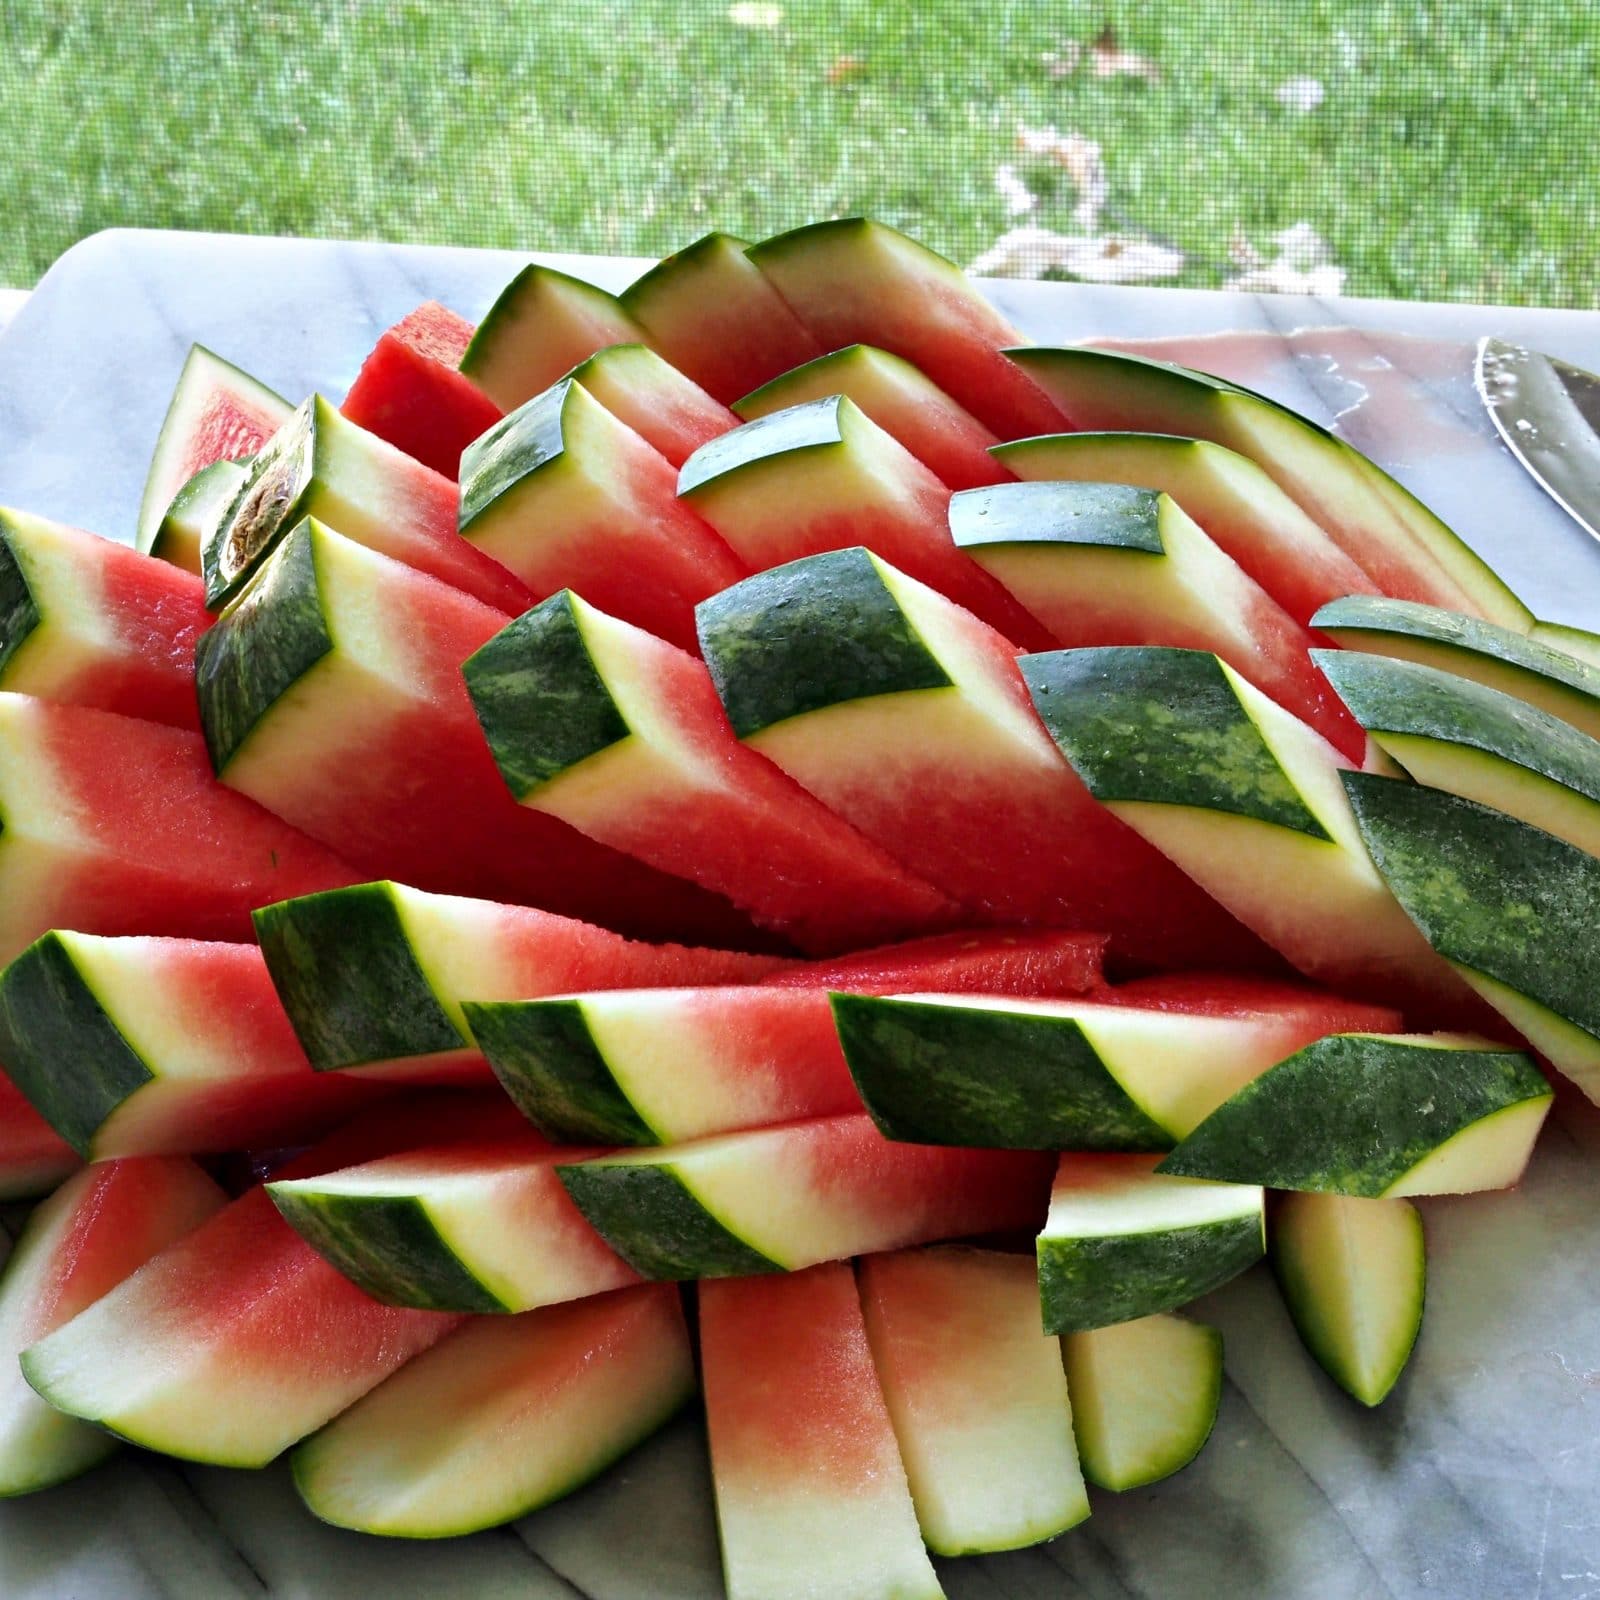 How To Cut A Watermelon For A Picnic